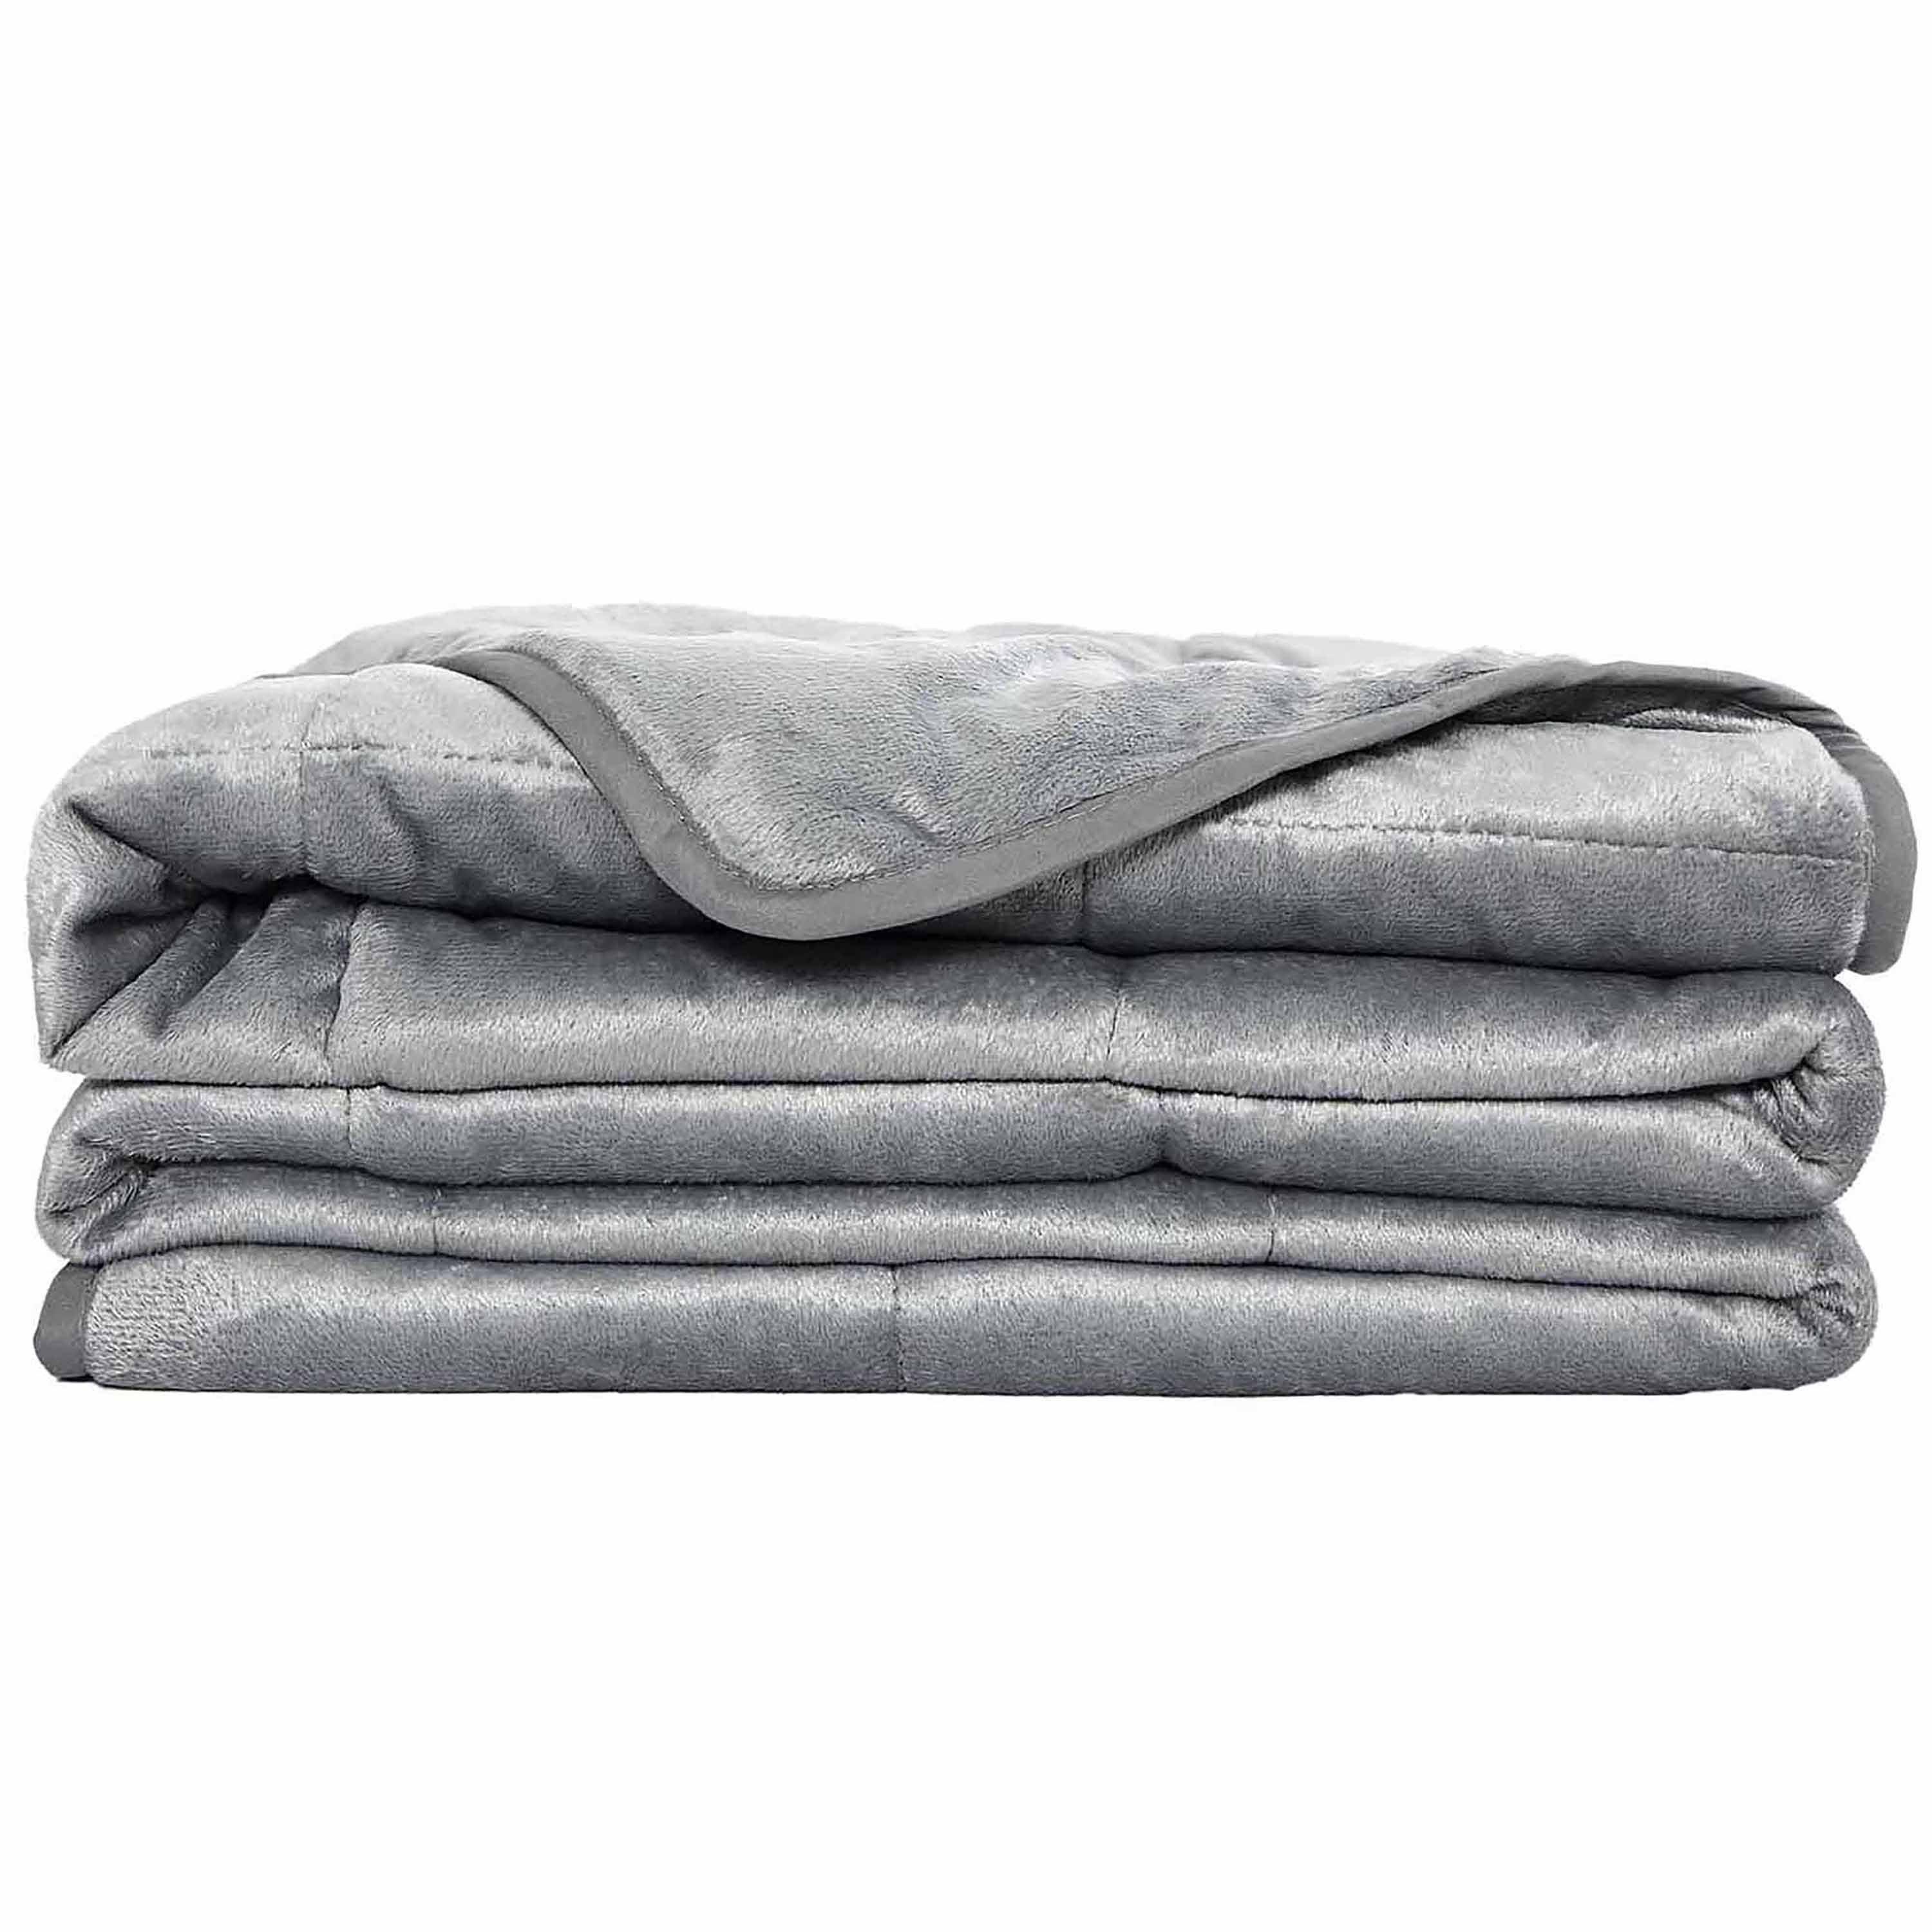 Silvadur Antimicrobial 12 lb Weighted Blanket